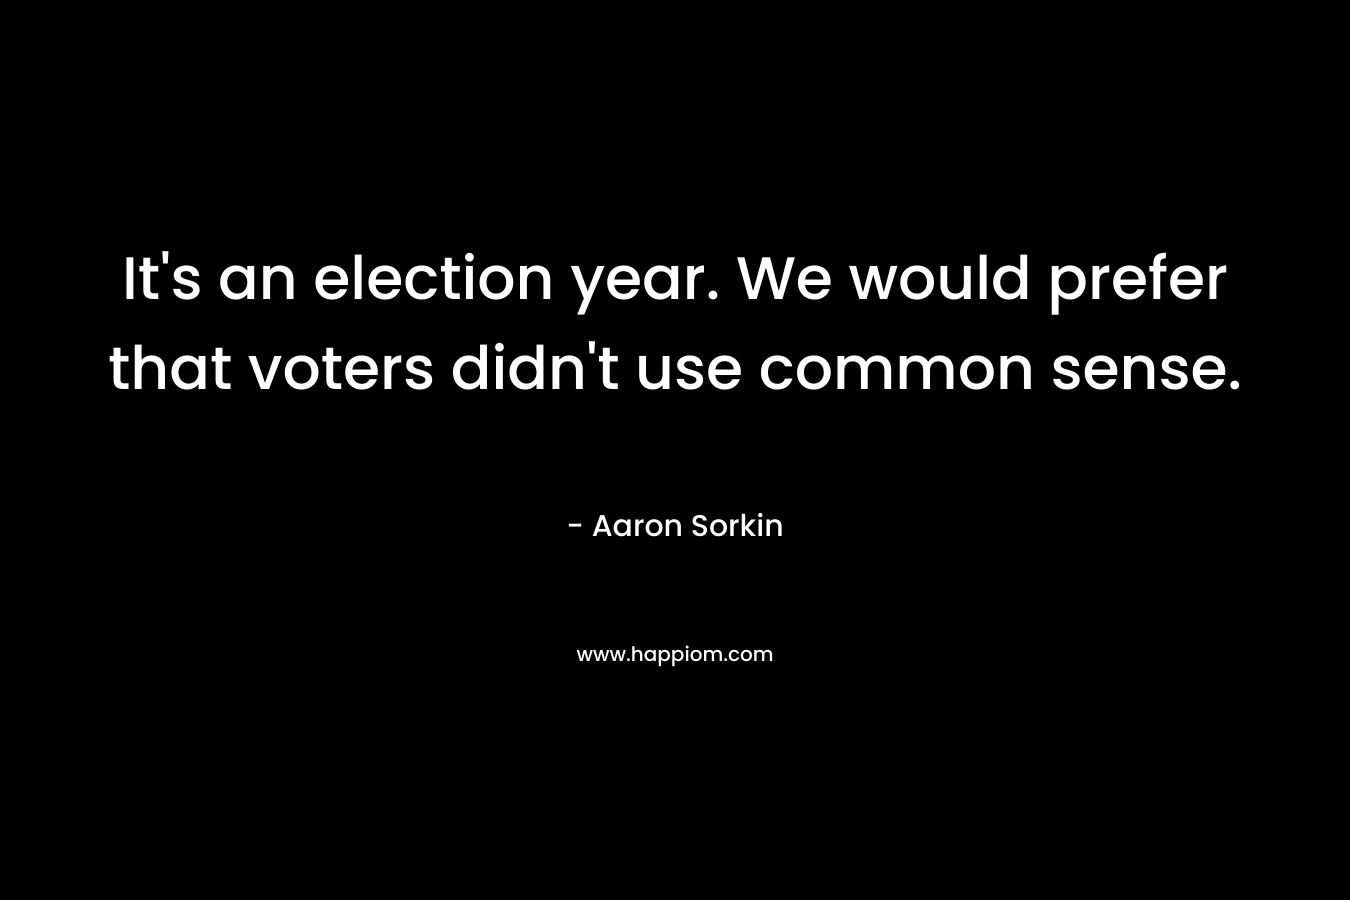 It’s an election year. We would prefer that voters didn’t use common sense. – Aaron Sorkin